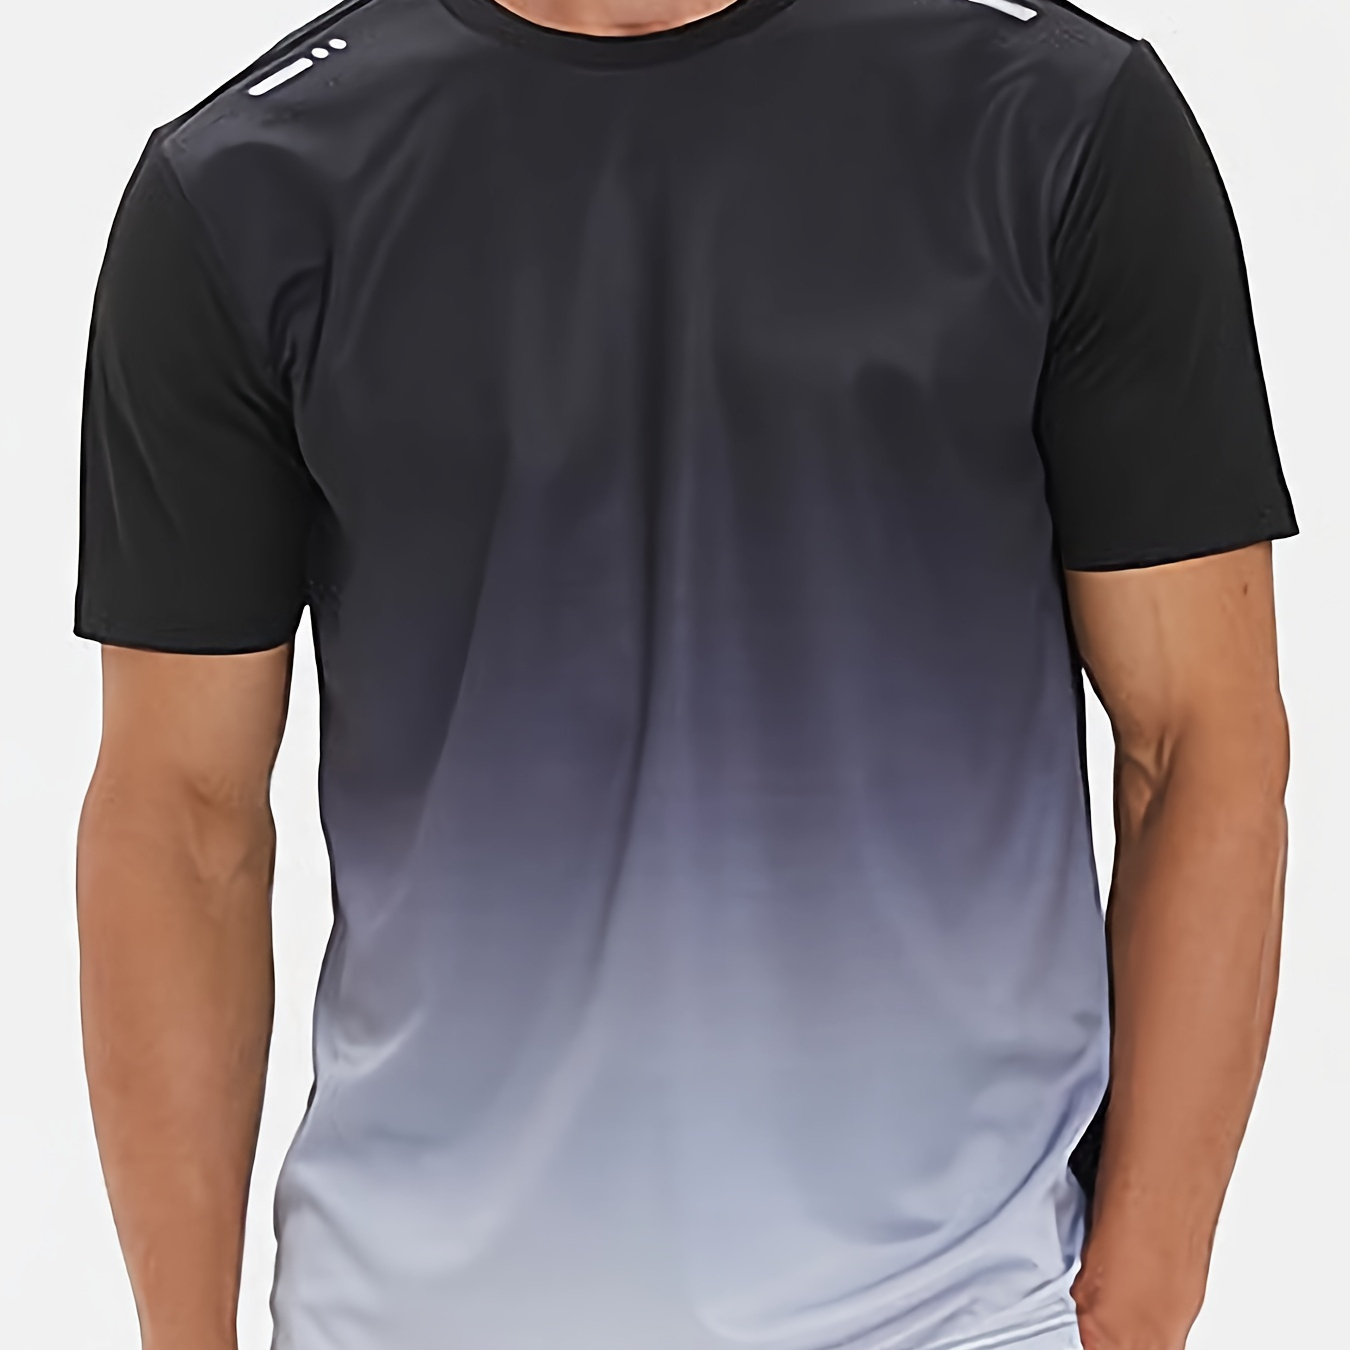 

Men's Athletic Fitness T-shirt, Short Sleeve Round Neck Gym Sports Top In Gradient Color, Loose Fit And Breathable